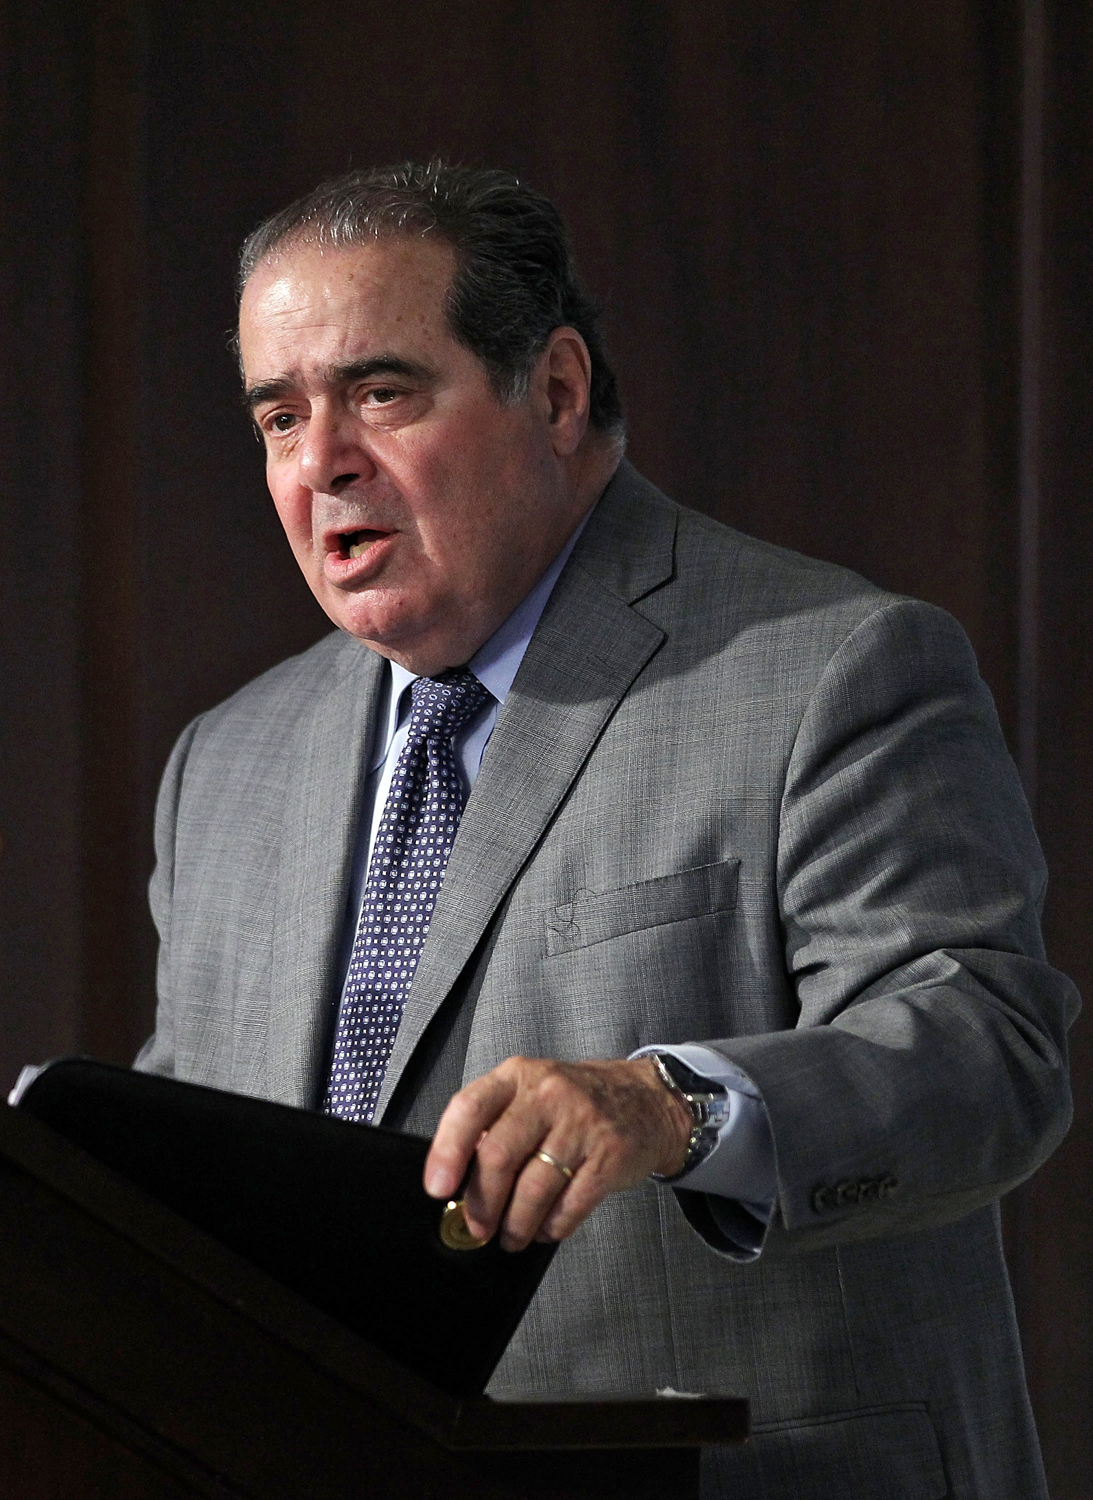 WASHINGTON, DC - OCTOBER 02:  U.S. Supreme Court Justice Antonin Scalia speaks at the American Enterprise Institute (AEI) October 2, 2012 in Washington, DC. The American Enterprise Institute and the Federalist Society held a book discussion with Justice Scalia, who co-authored the book "Reading Law: The Interpretation of Legal Texts."  (Photo by Alex Wong/Getty Images)